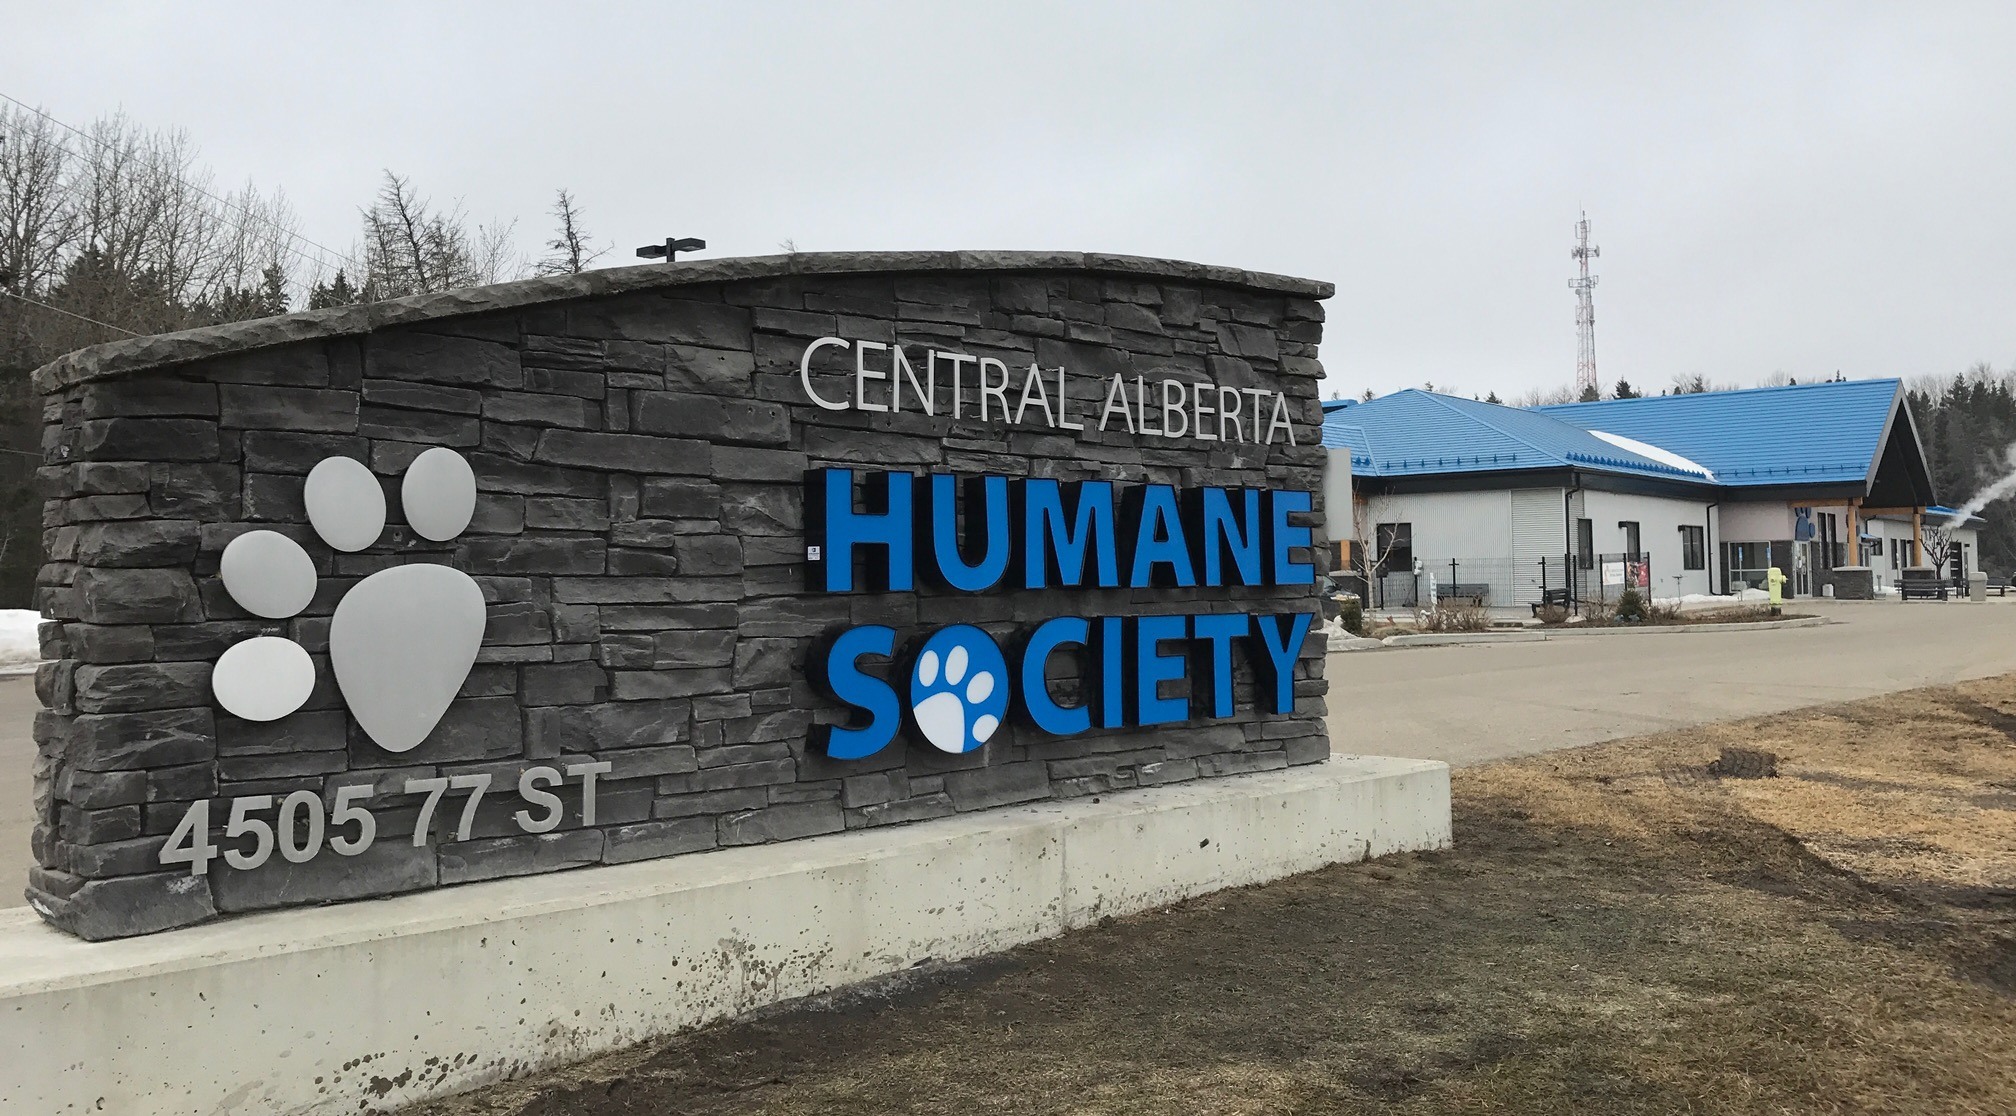 NEW NAME - The Red Deer and District SPCA has changed their name to the Central Alberta Humane Society.